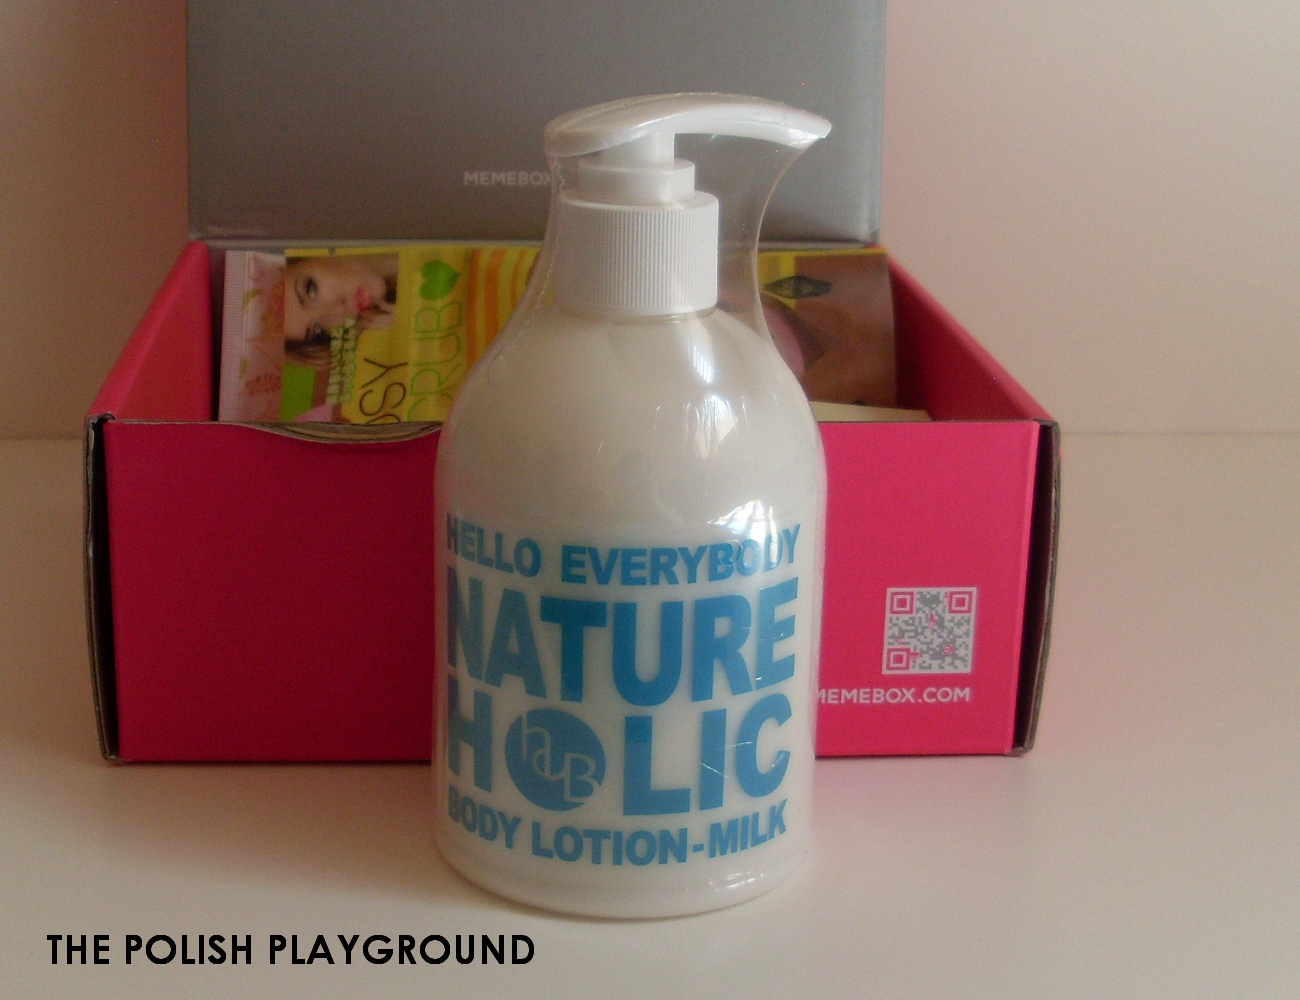 Memebox Special #7 Milk Unboxing - Hello Everybody Nature Holic Body Lotion Milk